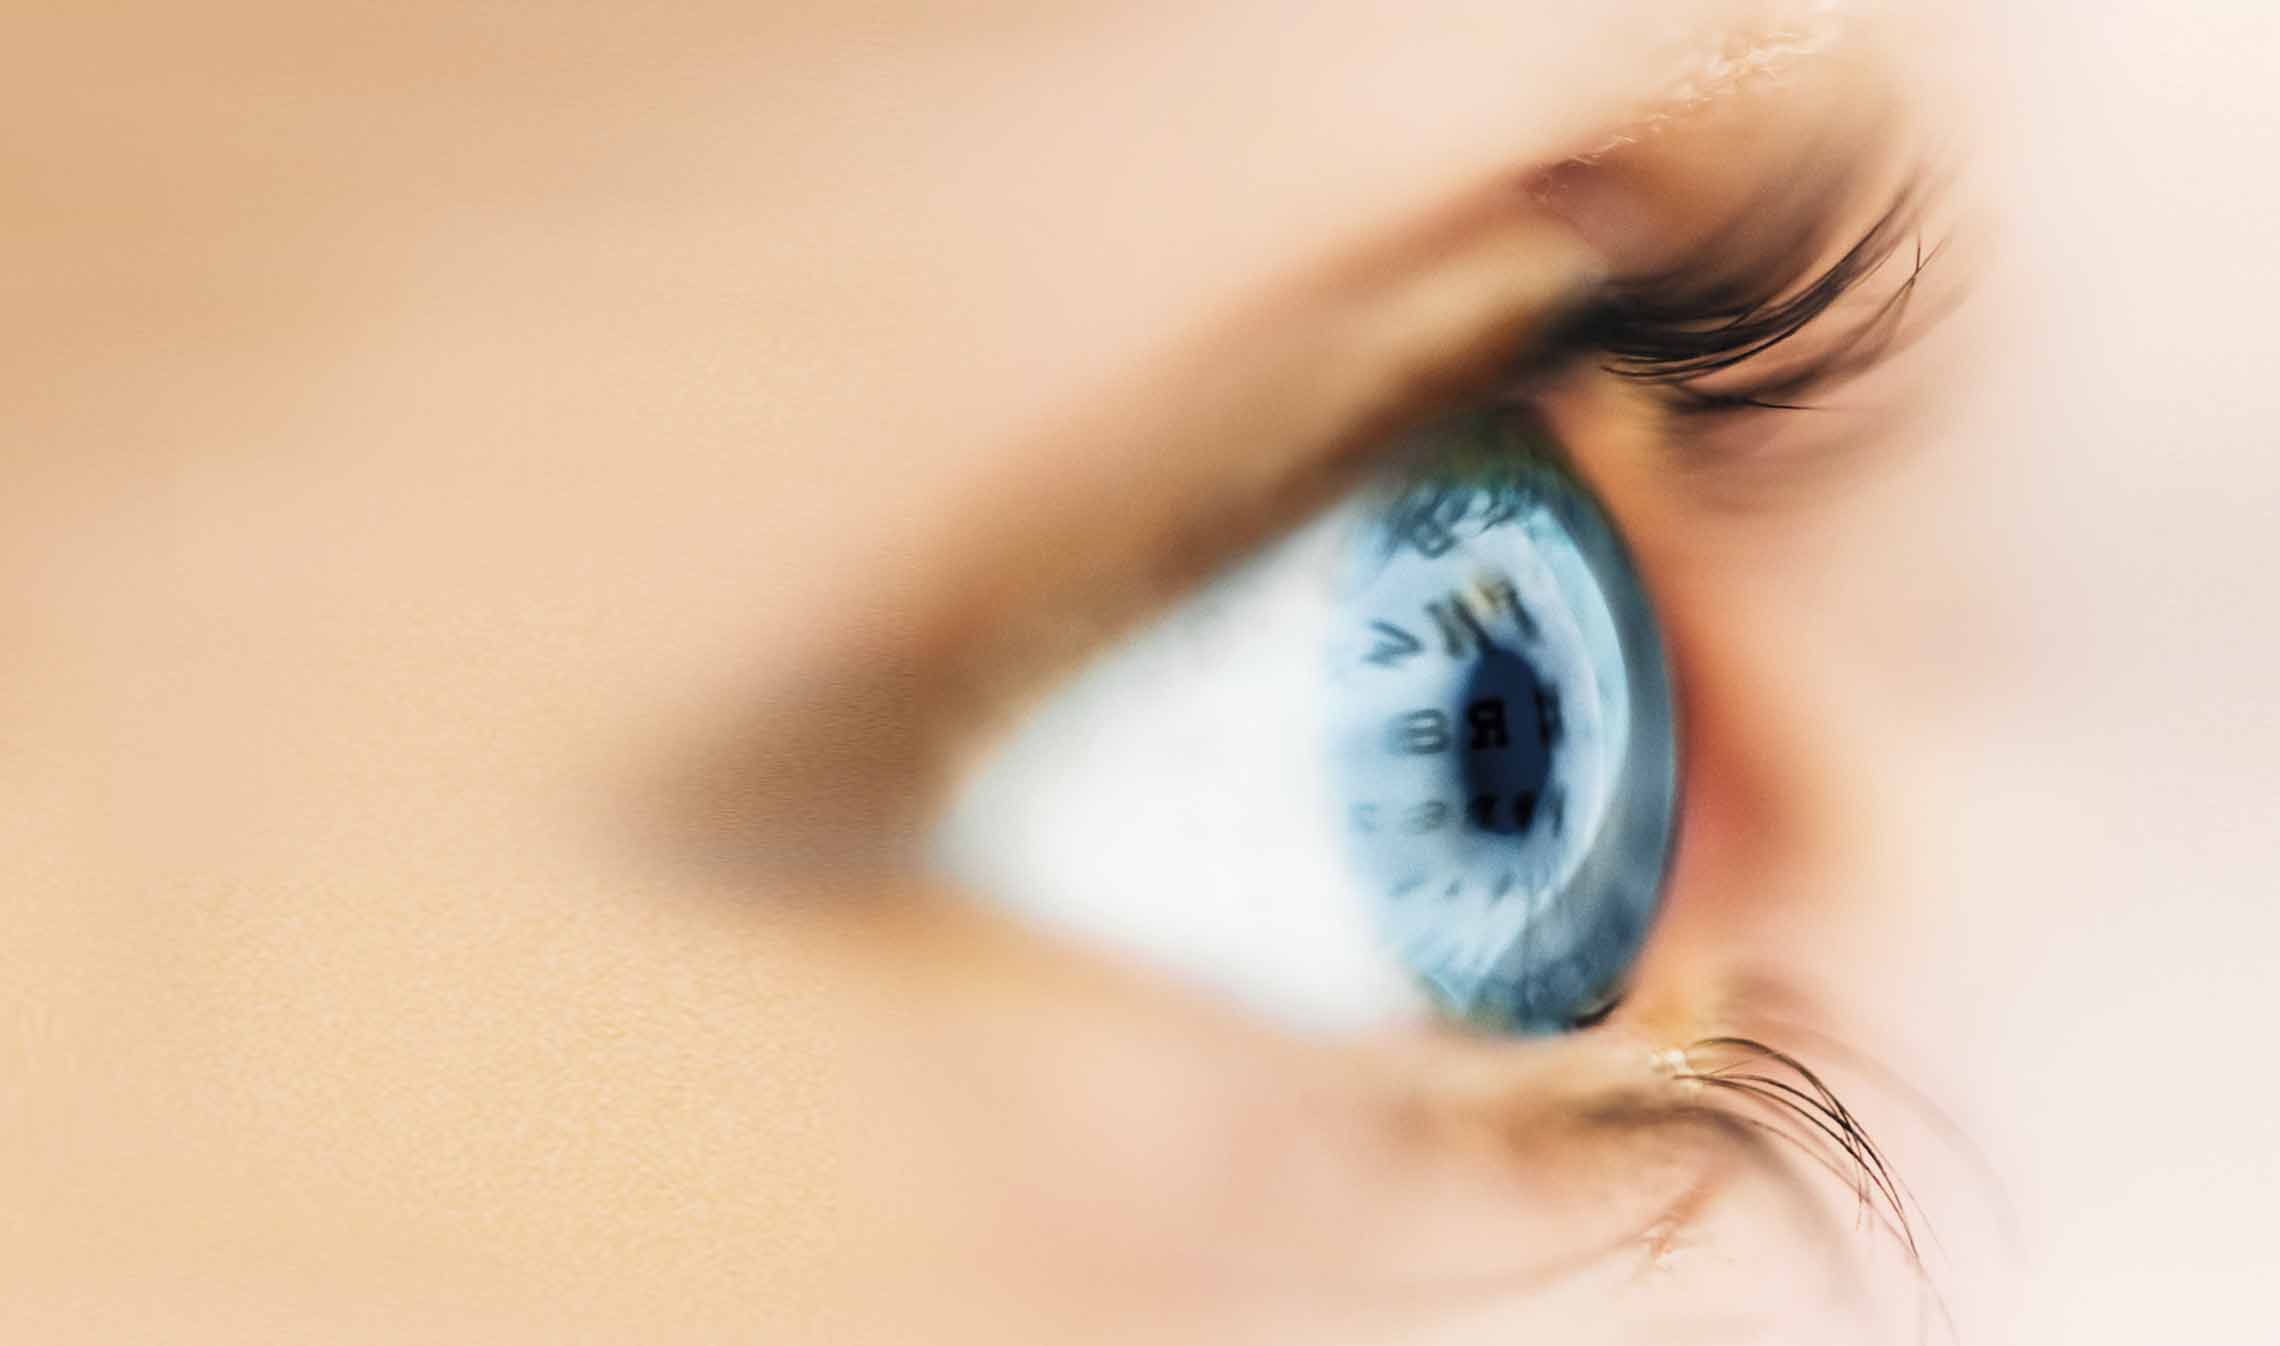 Can Stem Cells Cure Blindness?